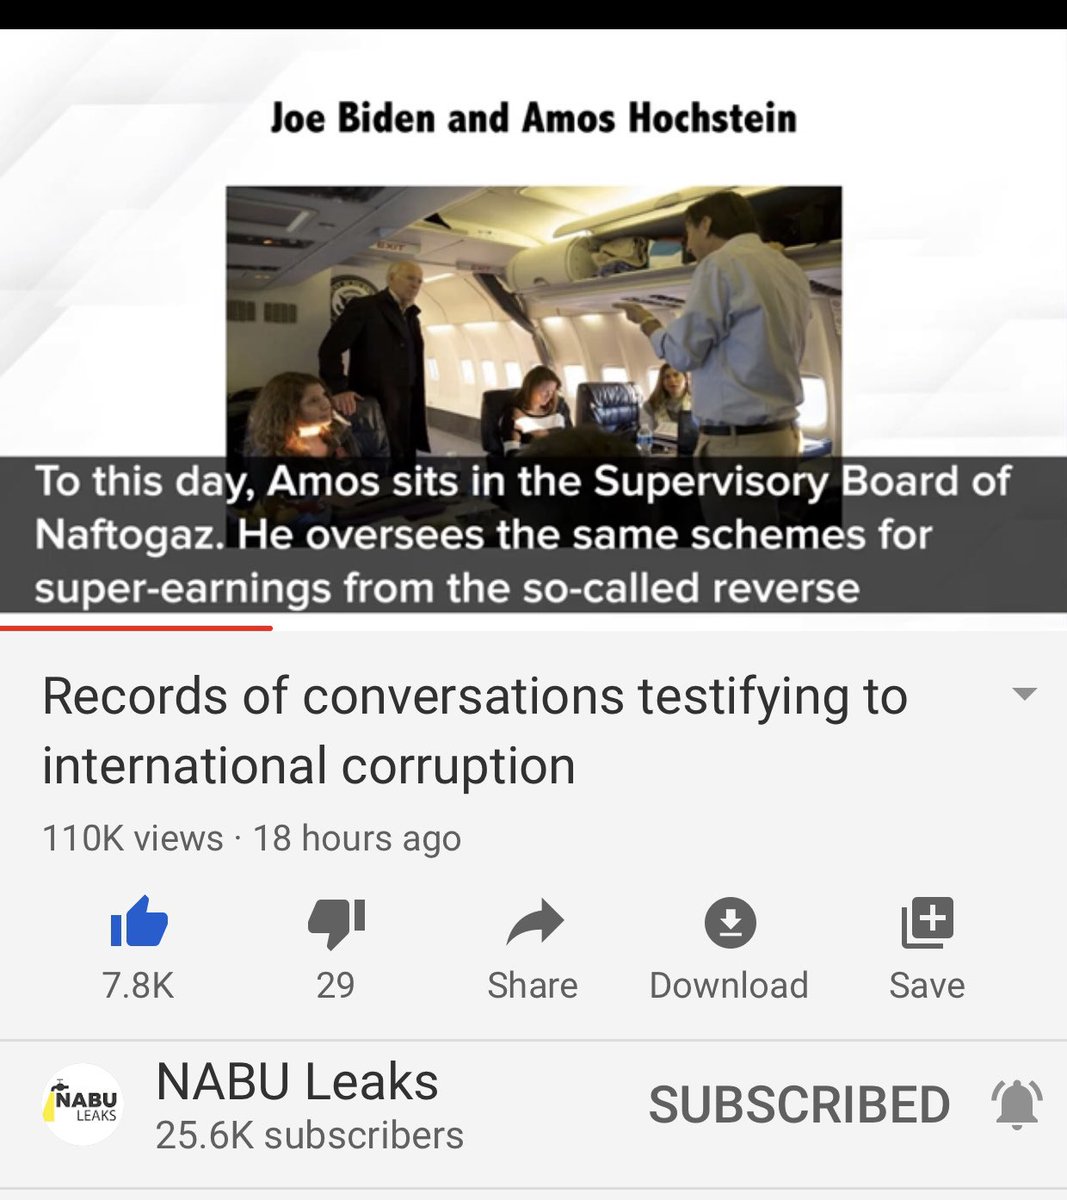 The investigator is highly sarcastic which is funny in this sad tale of corruption. Anyway, he reminds us what we heard back in Nov about the corruption, incl Hochstein being the Biden henchman watching over Naftogaz for him